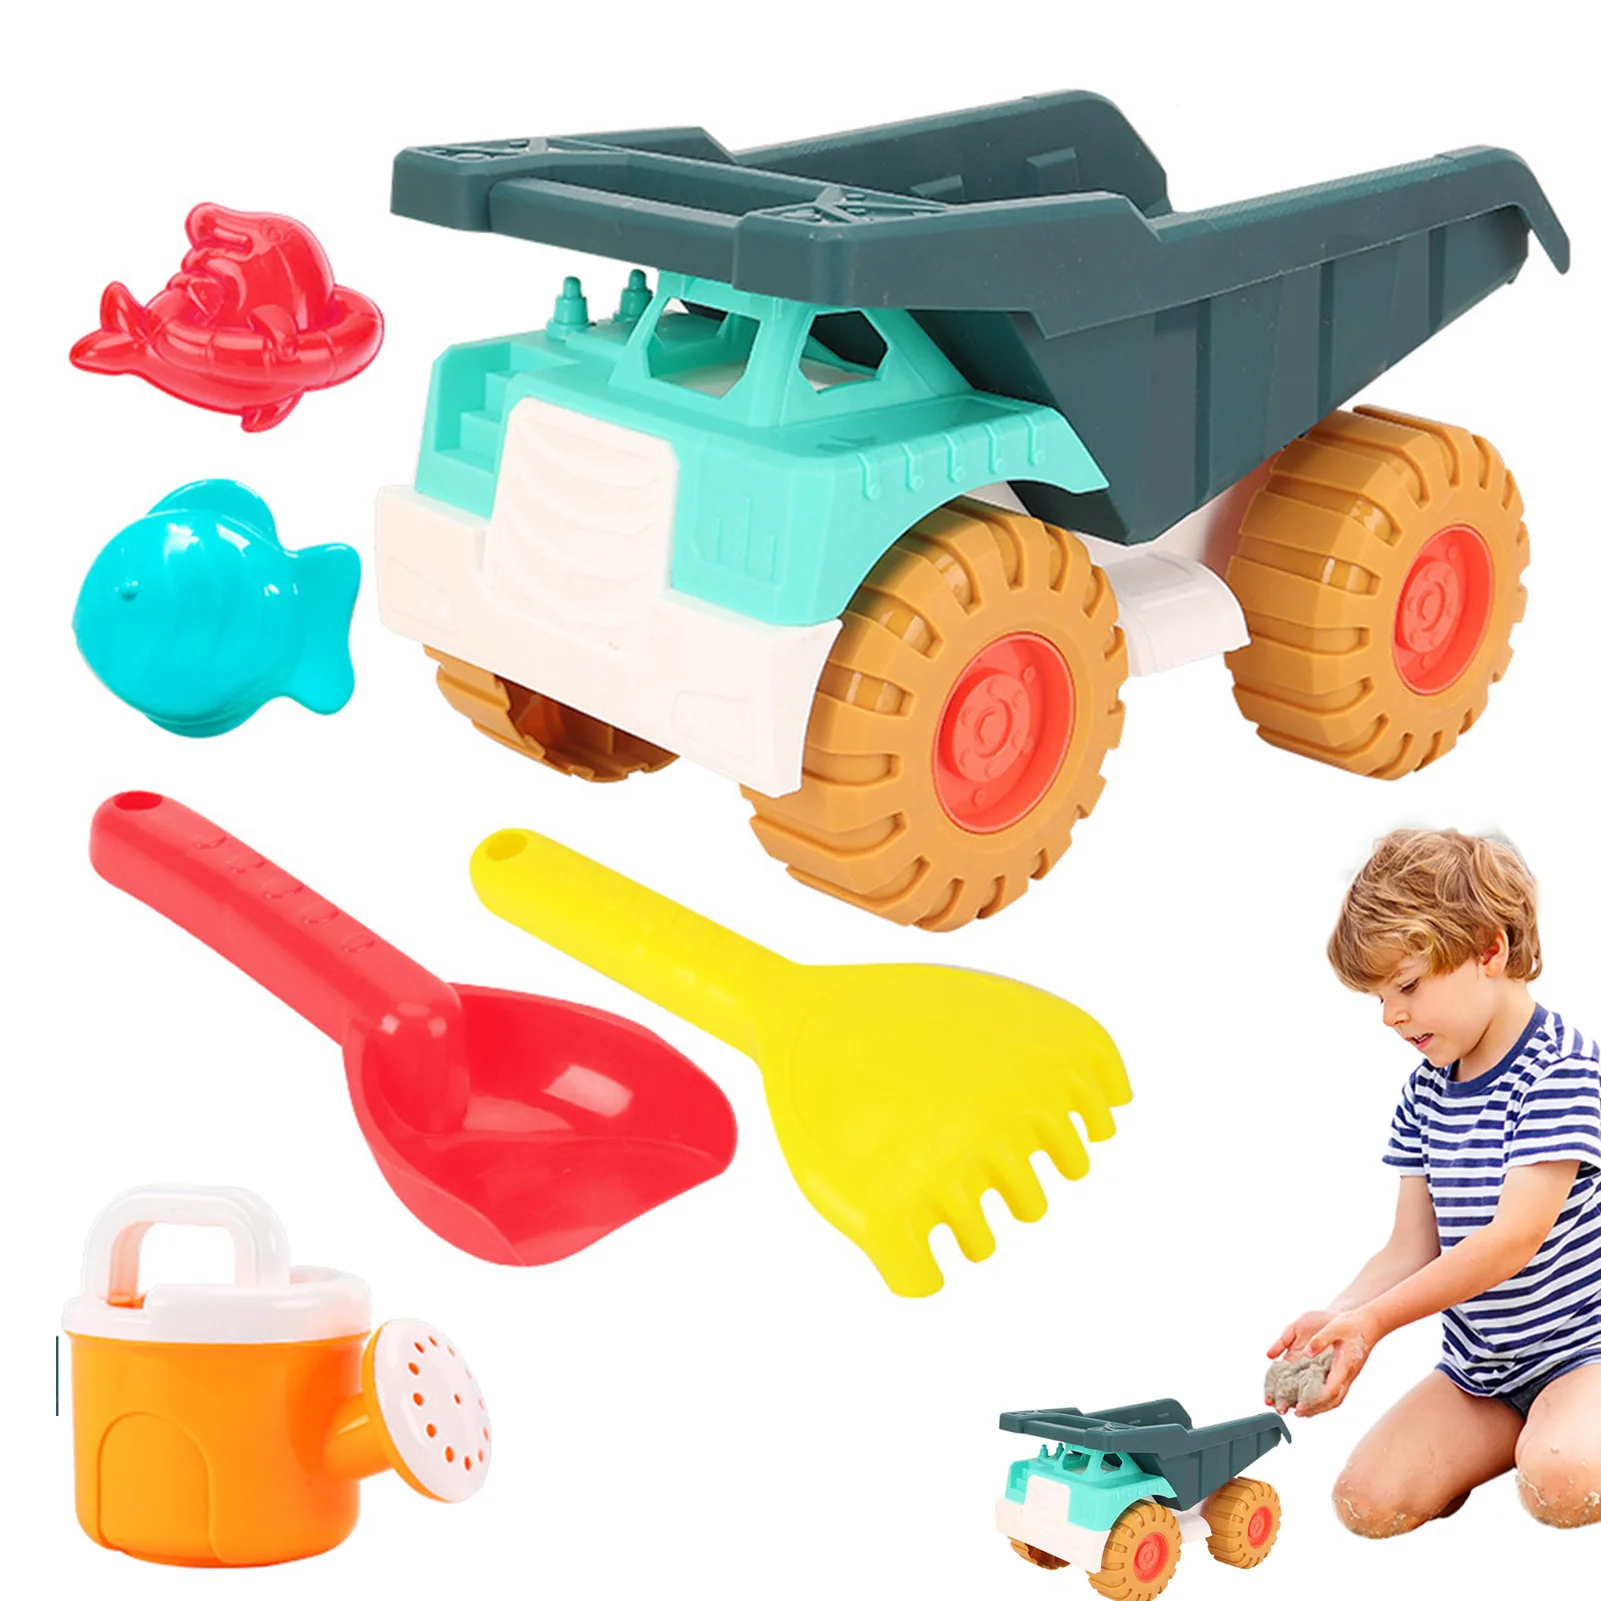 

Truck Beach Toy Set Beach Sand Toys For Kids With Soft Material Bucket And Spade Play Sandpit Games For Toddlers Children